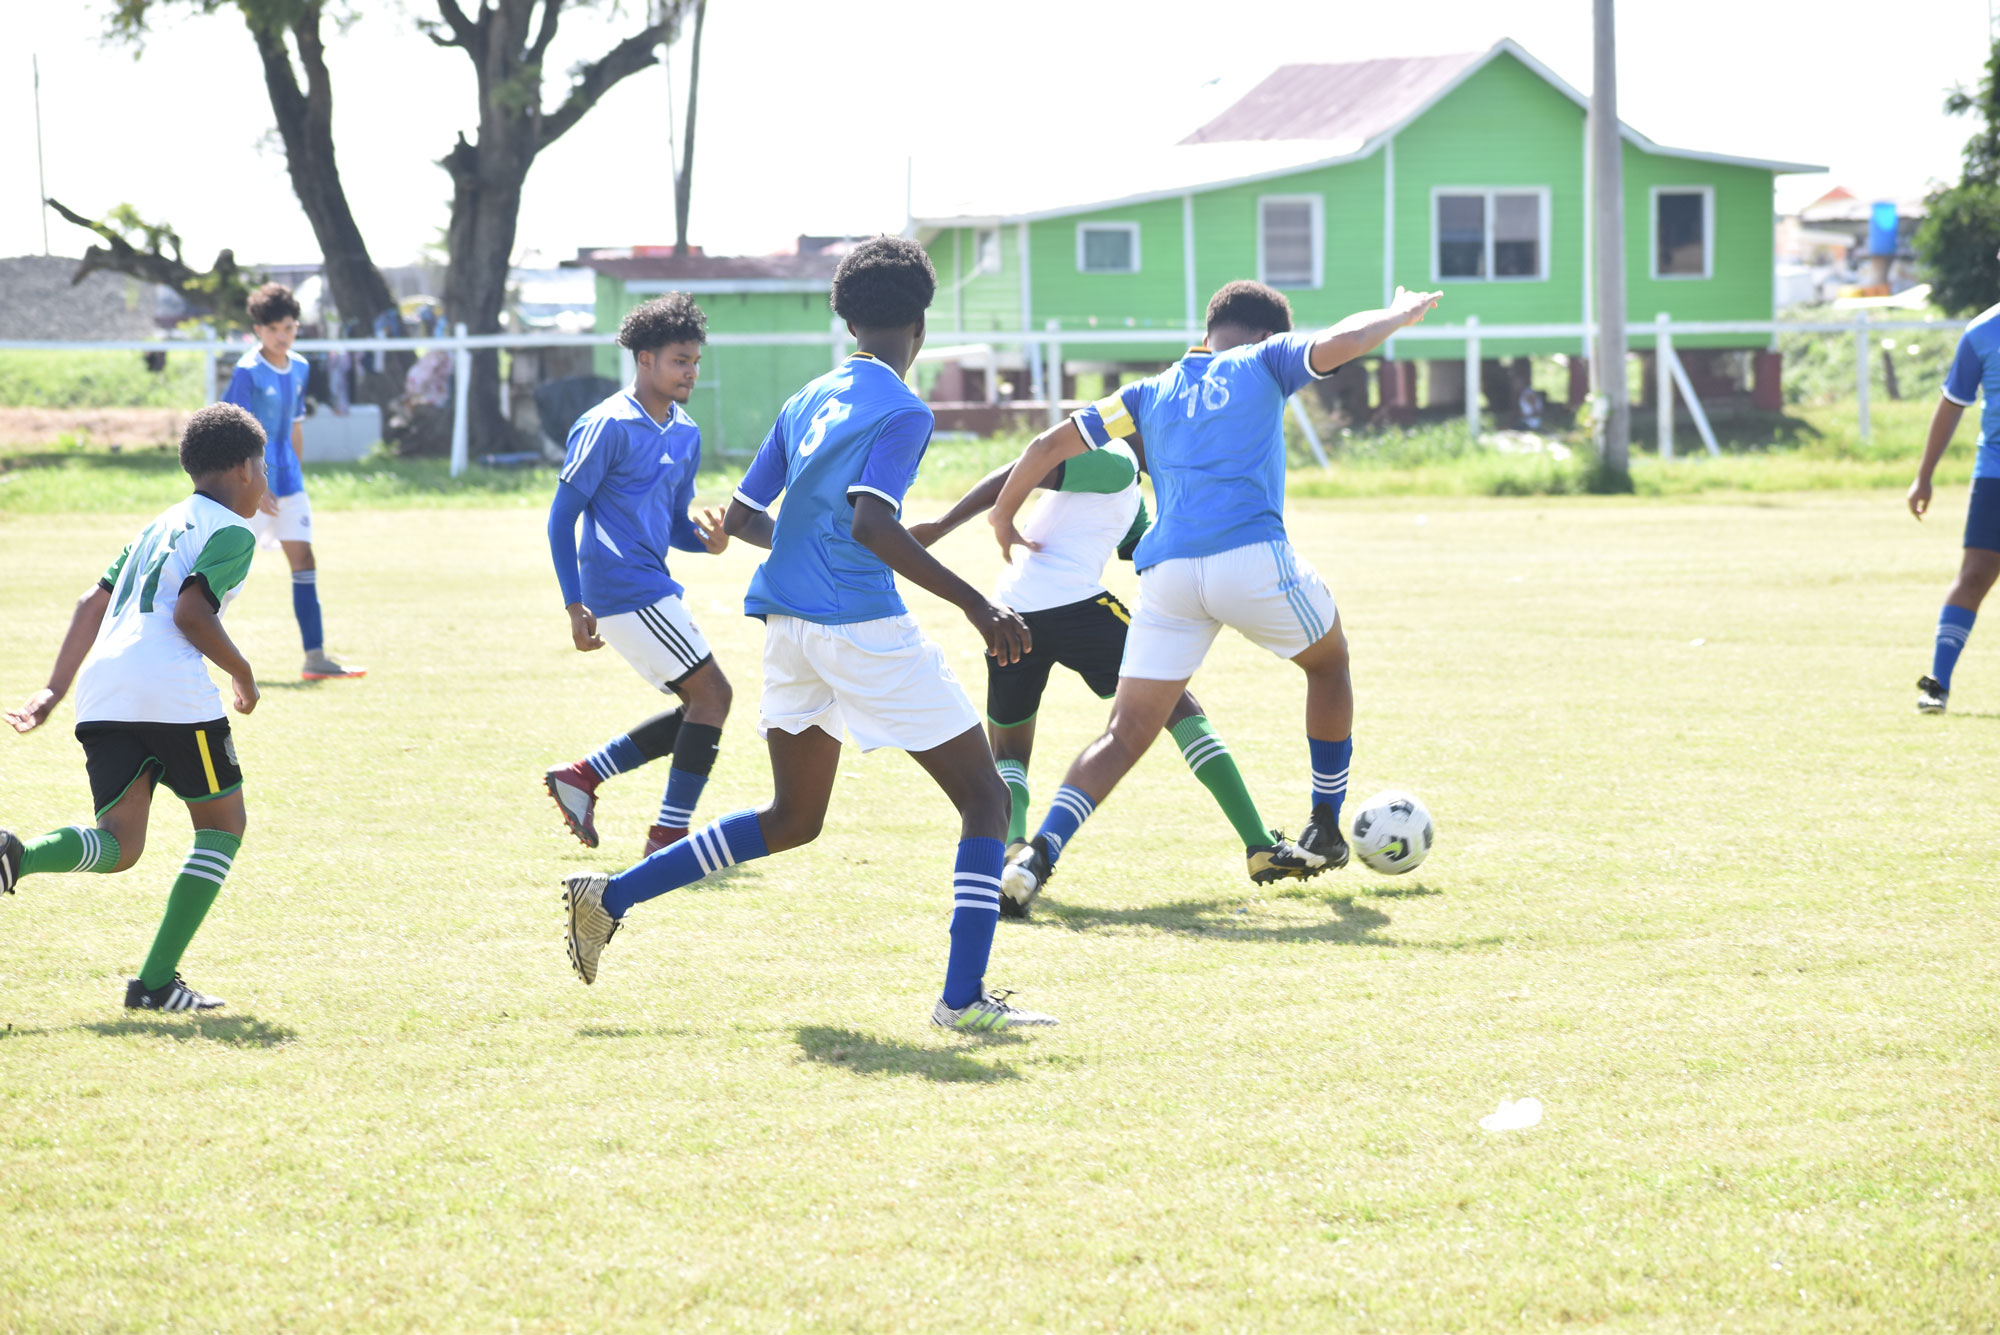 Marian Academy (on ball) players took advantage of their larger stature in their match against Ascension.